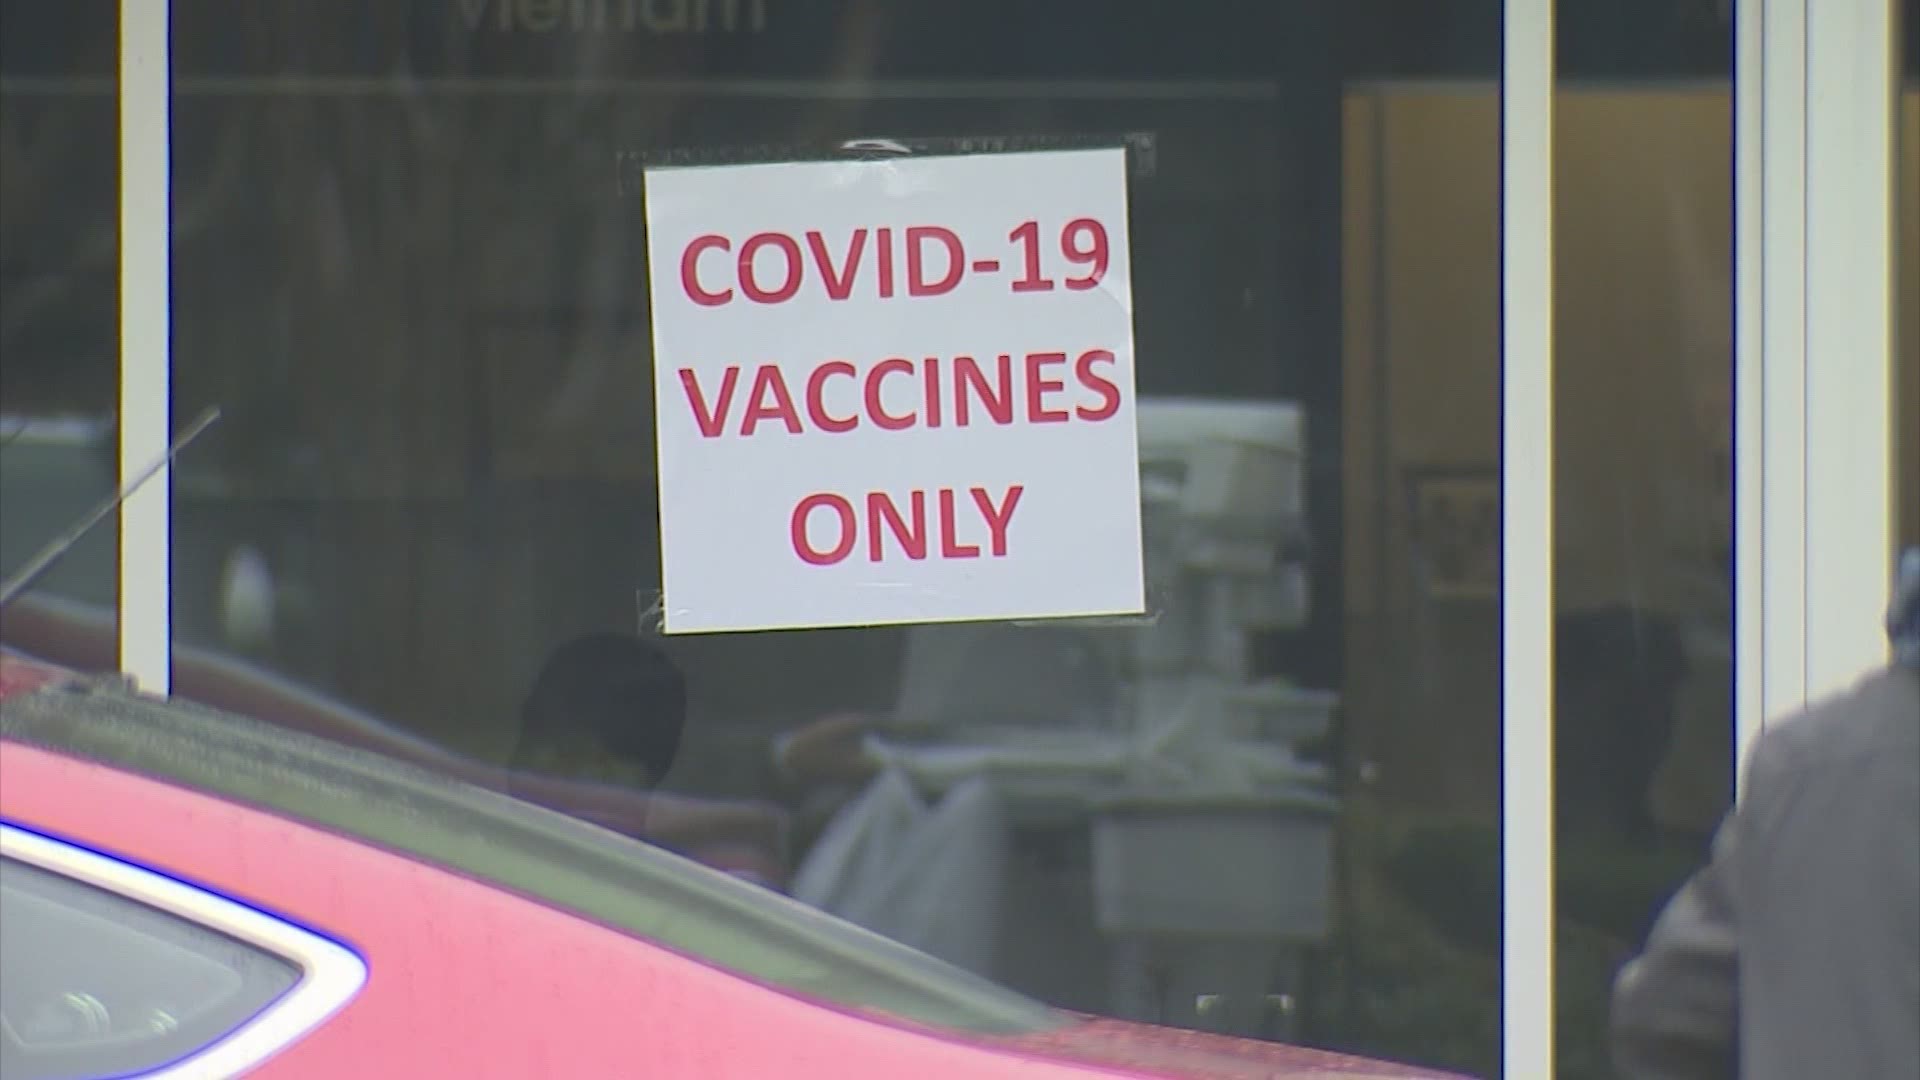 The winter storm pretty much derailed everything that was going on in the Houston area, including COVID-19 vaccinations.